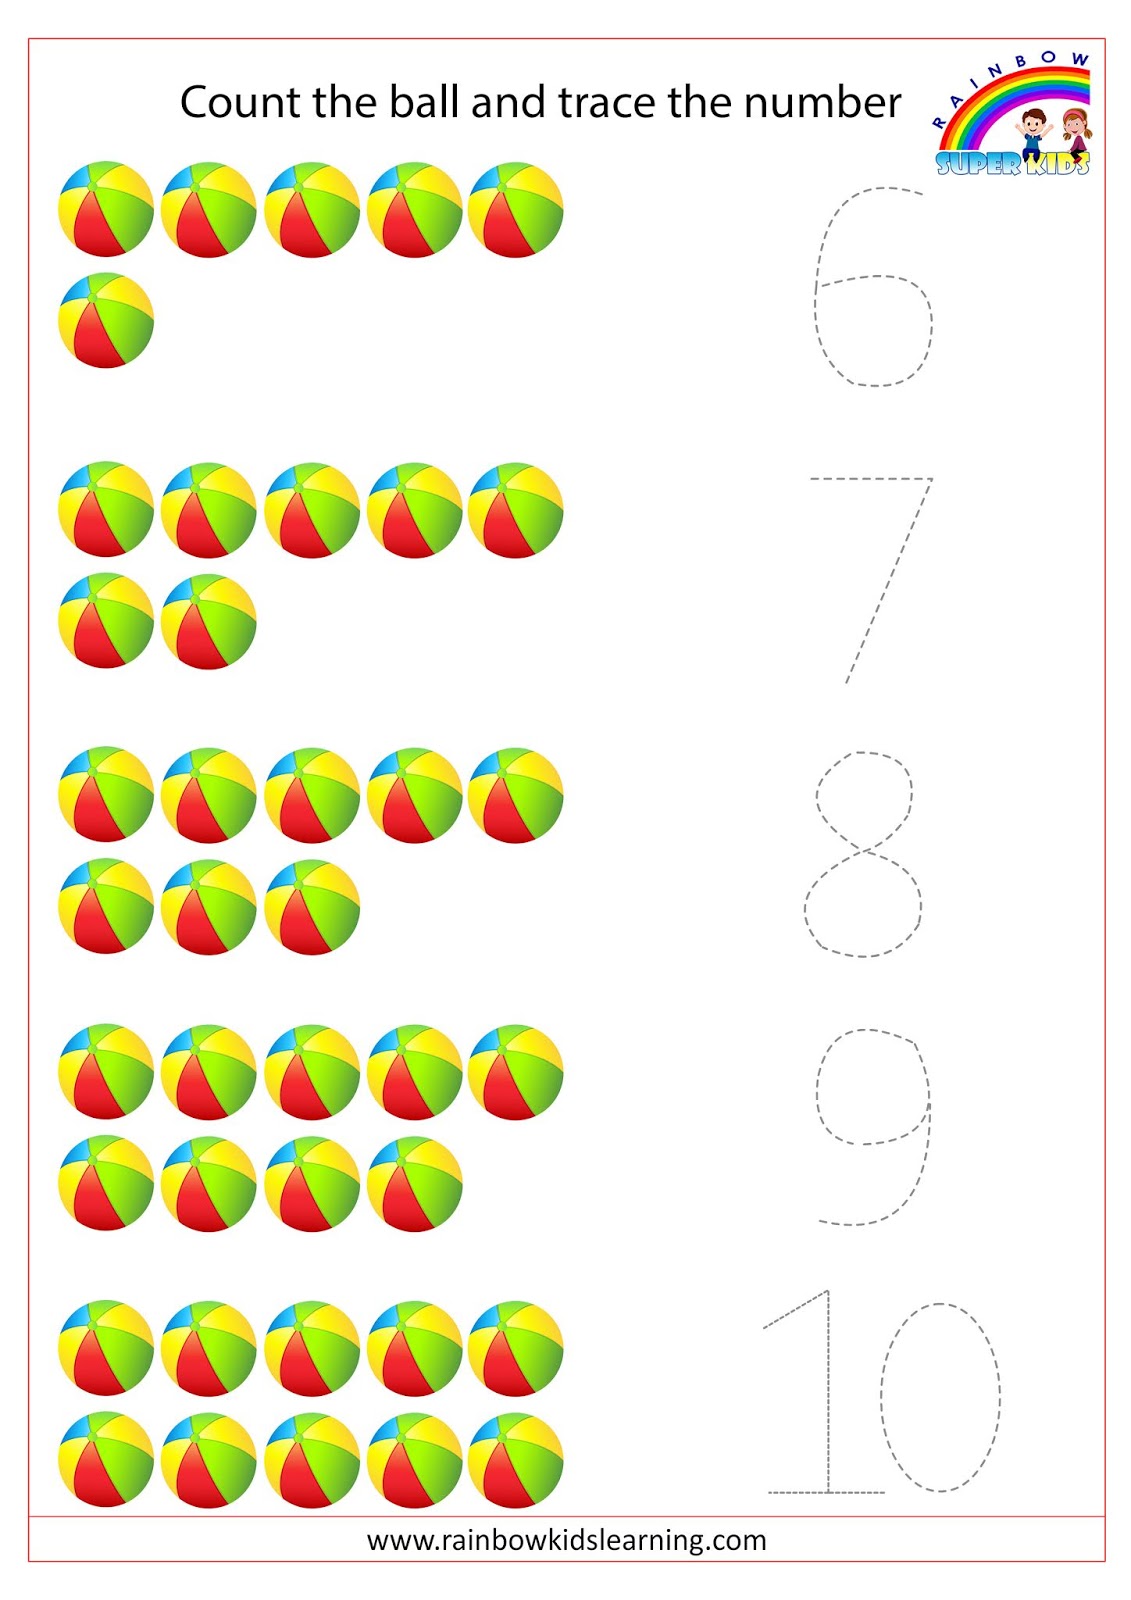 Count The Ball And Trace The Number - Rainbow Kids Learning